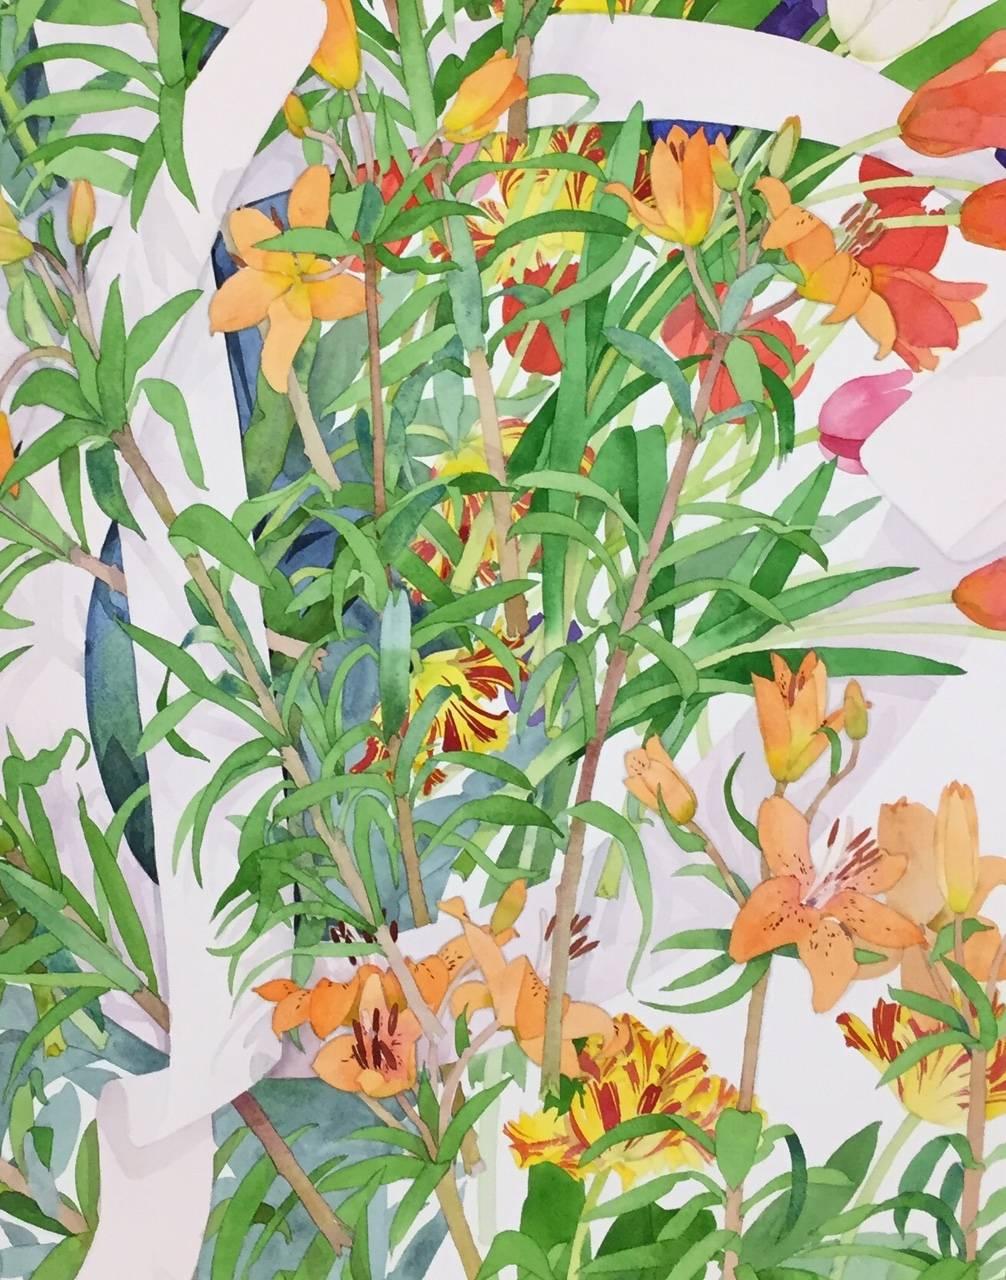 A floral celebration on a scale not typically associated with watercolor, the paper itself is 60 x 40 inches. With professional framing in maple, the outer dimension is  65 x 45 inches. Painted in 2017 by Gary Bukovnik. 

Bukovnik’s art conveys a